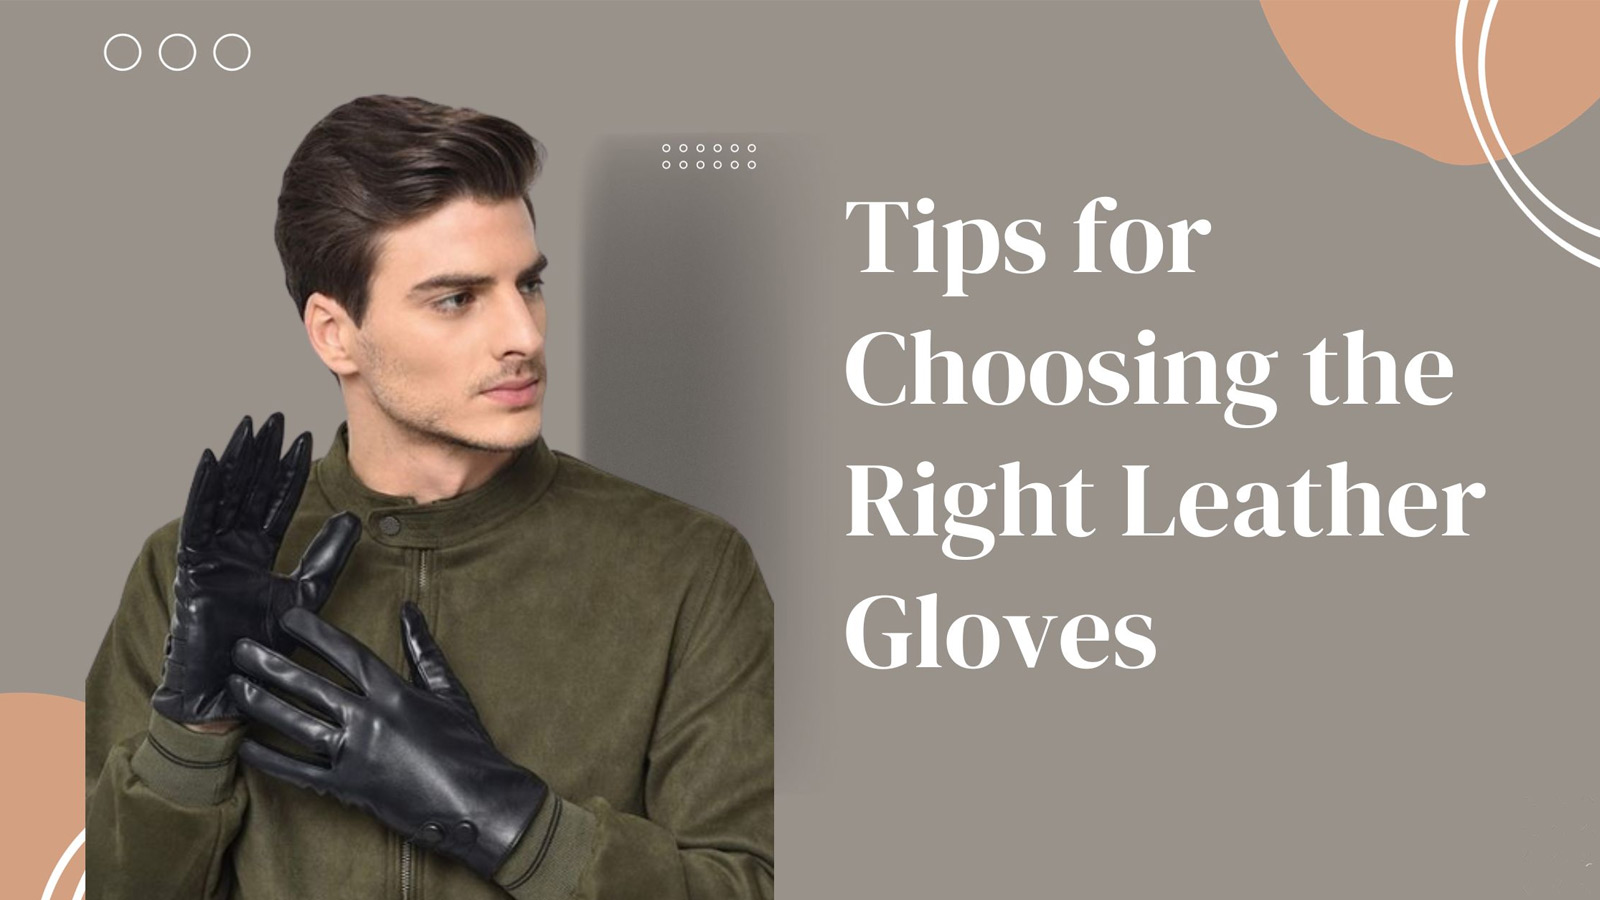 Tips for Choosing the Right Leather Gloves